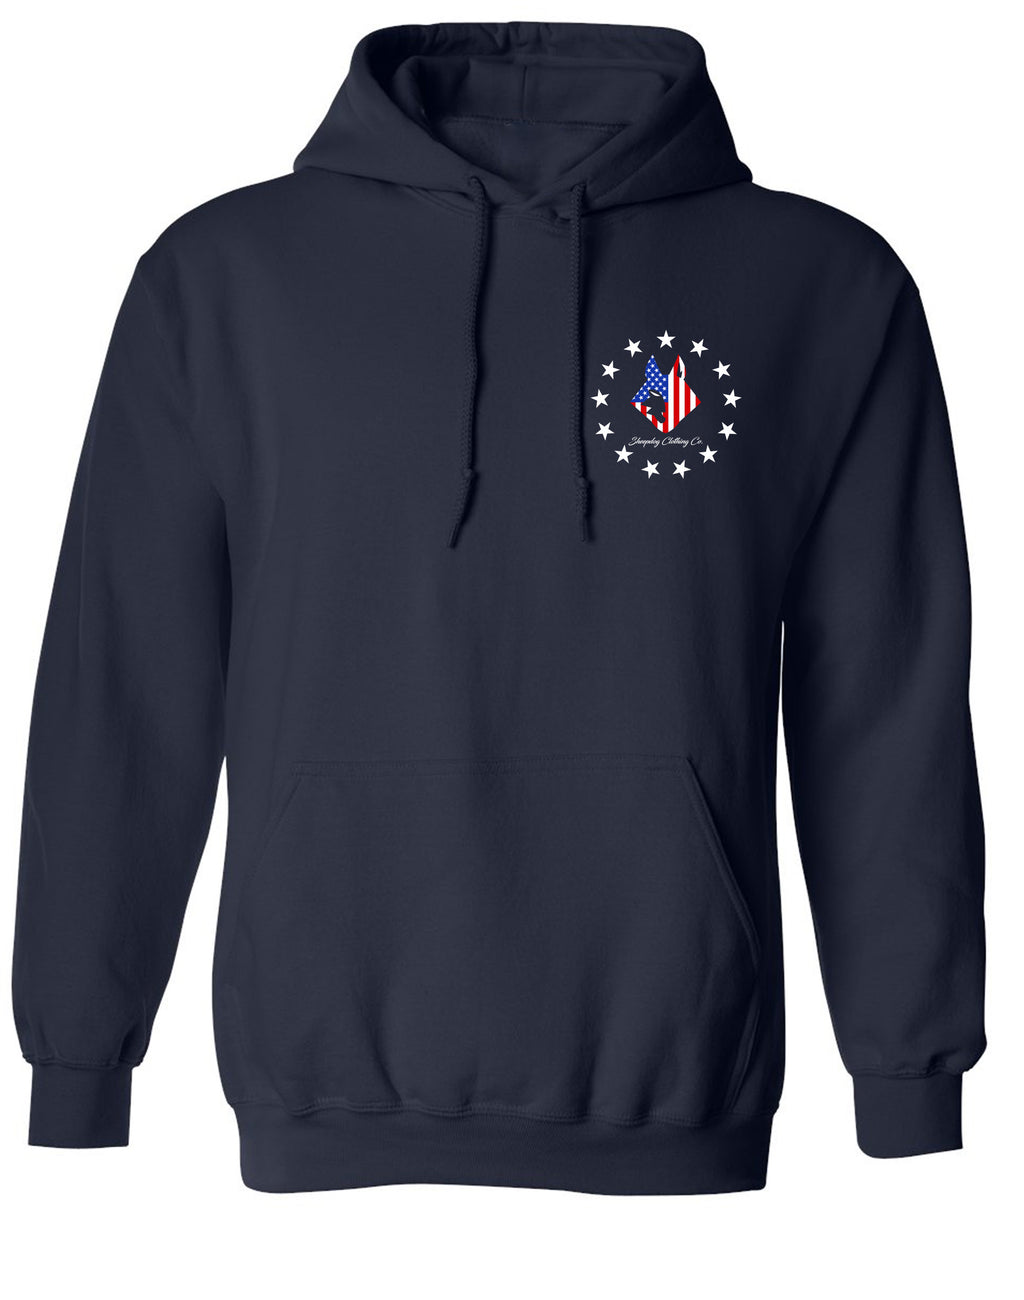 Home of the Brave Hoodie- NAVY BLUE